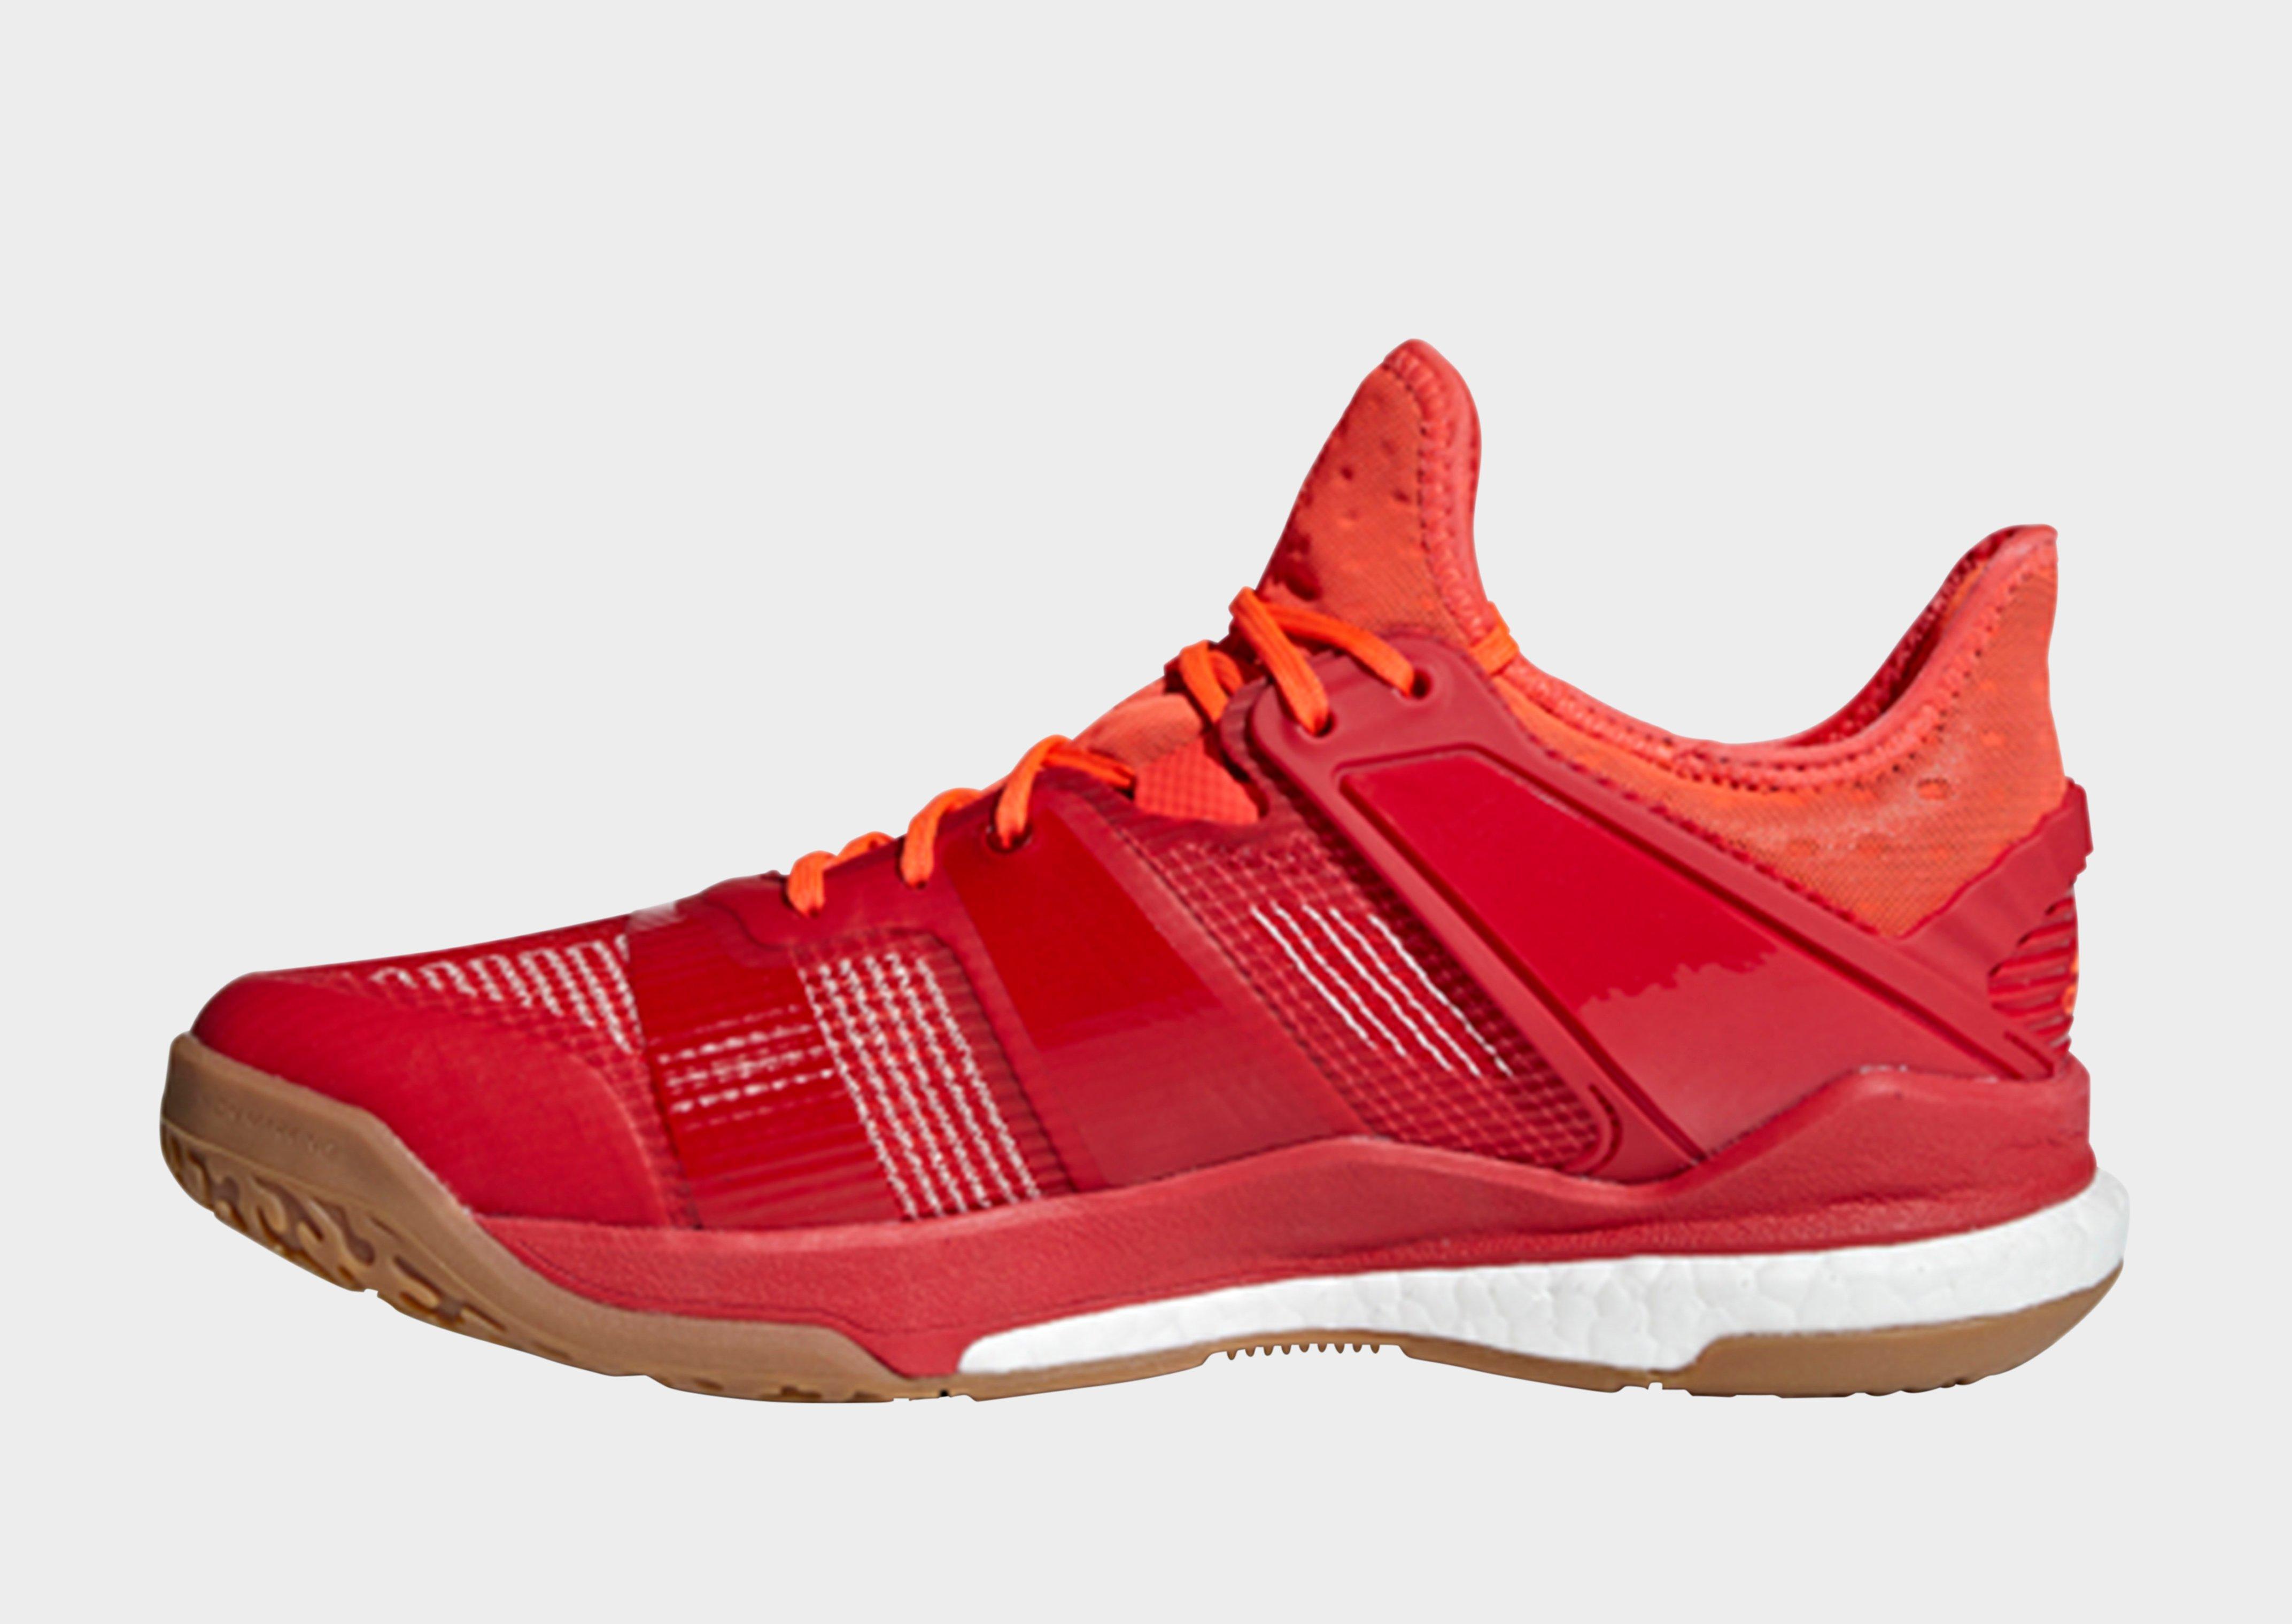 adidas stabil red - 58% remise - www 